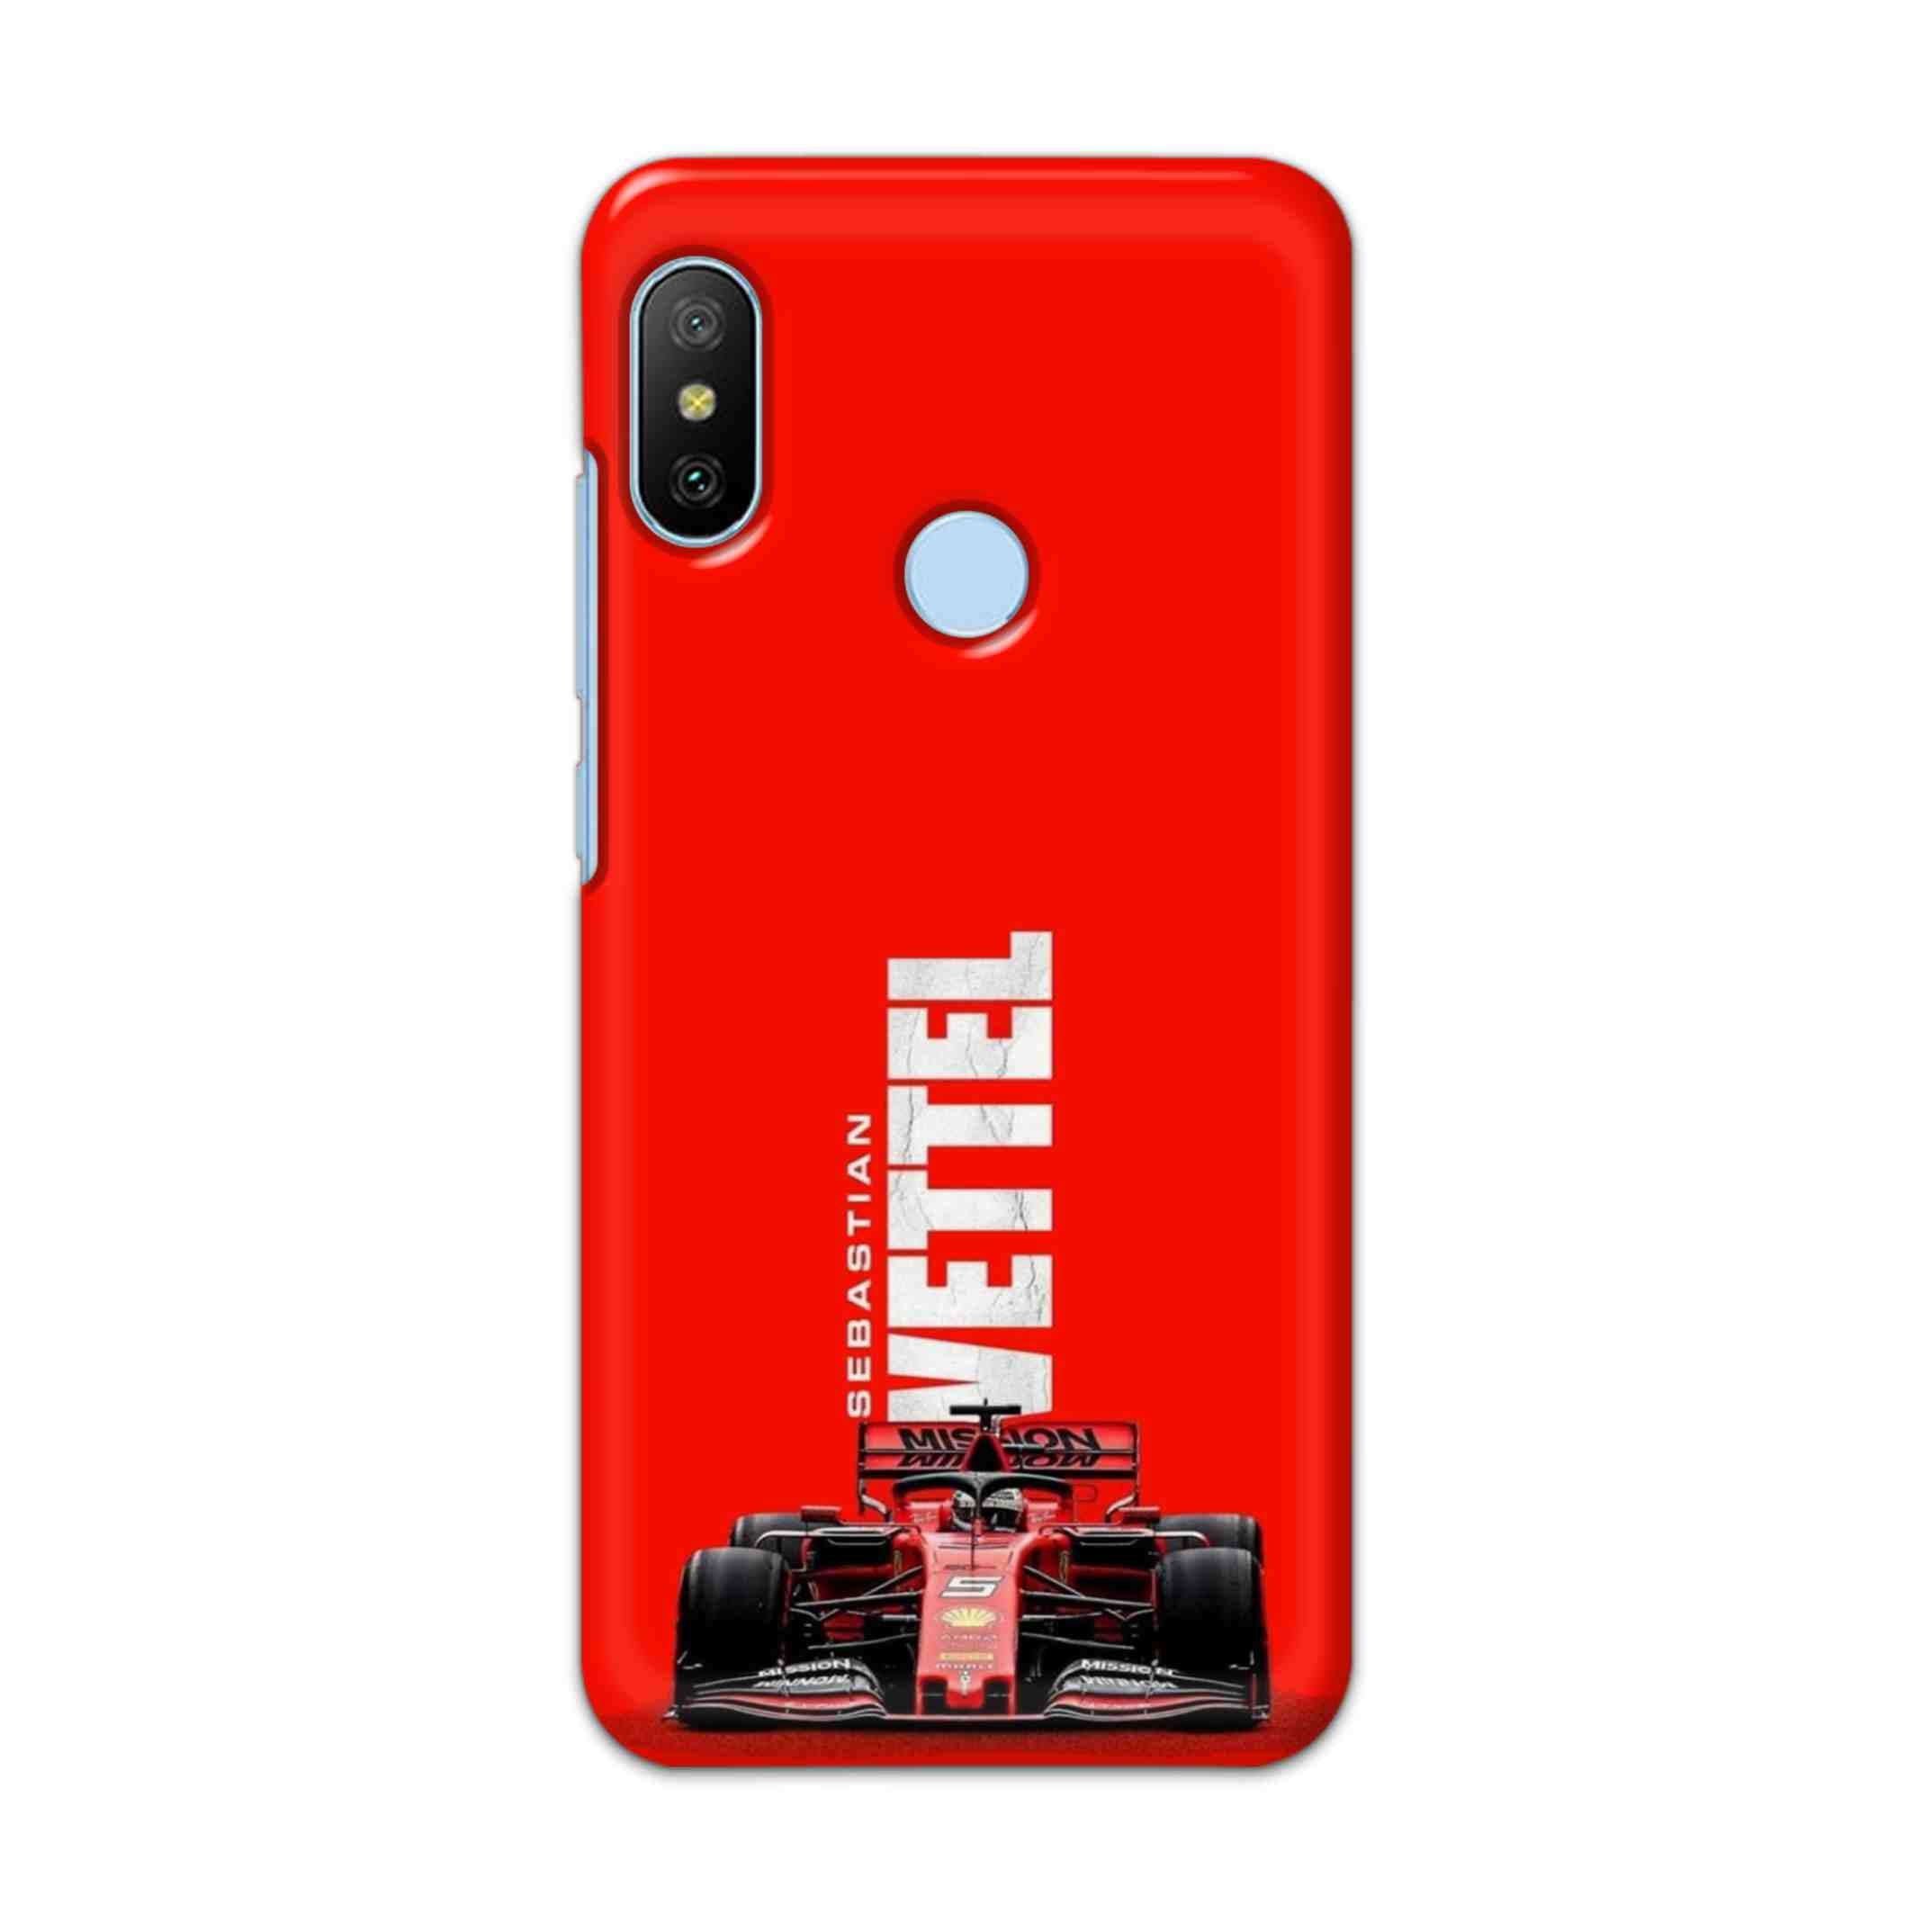 Buy Formula Hard Back Mobile Phone Case/Cover For Xiaomi Redmi 6 Pro Online